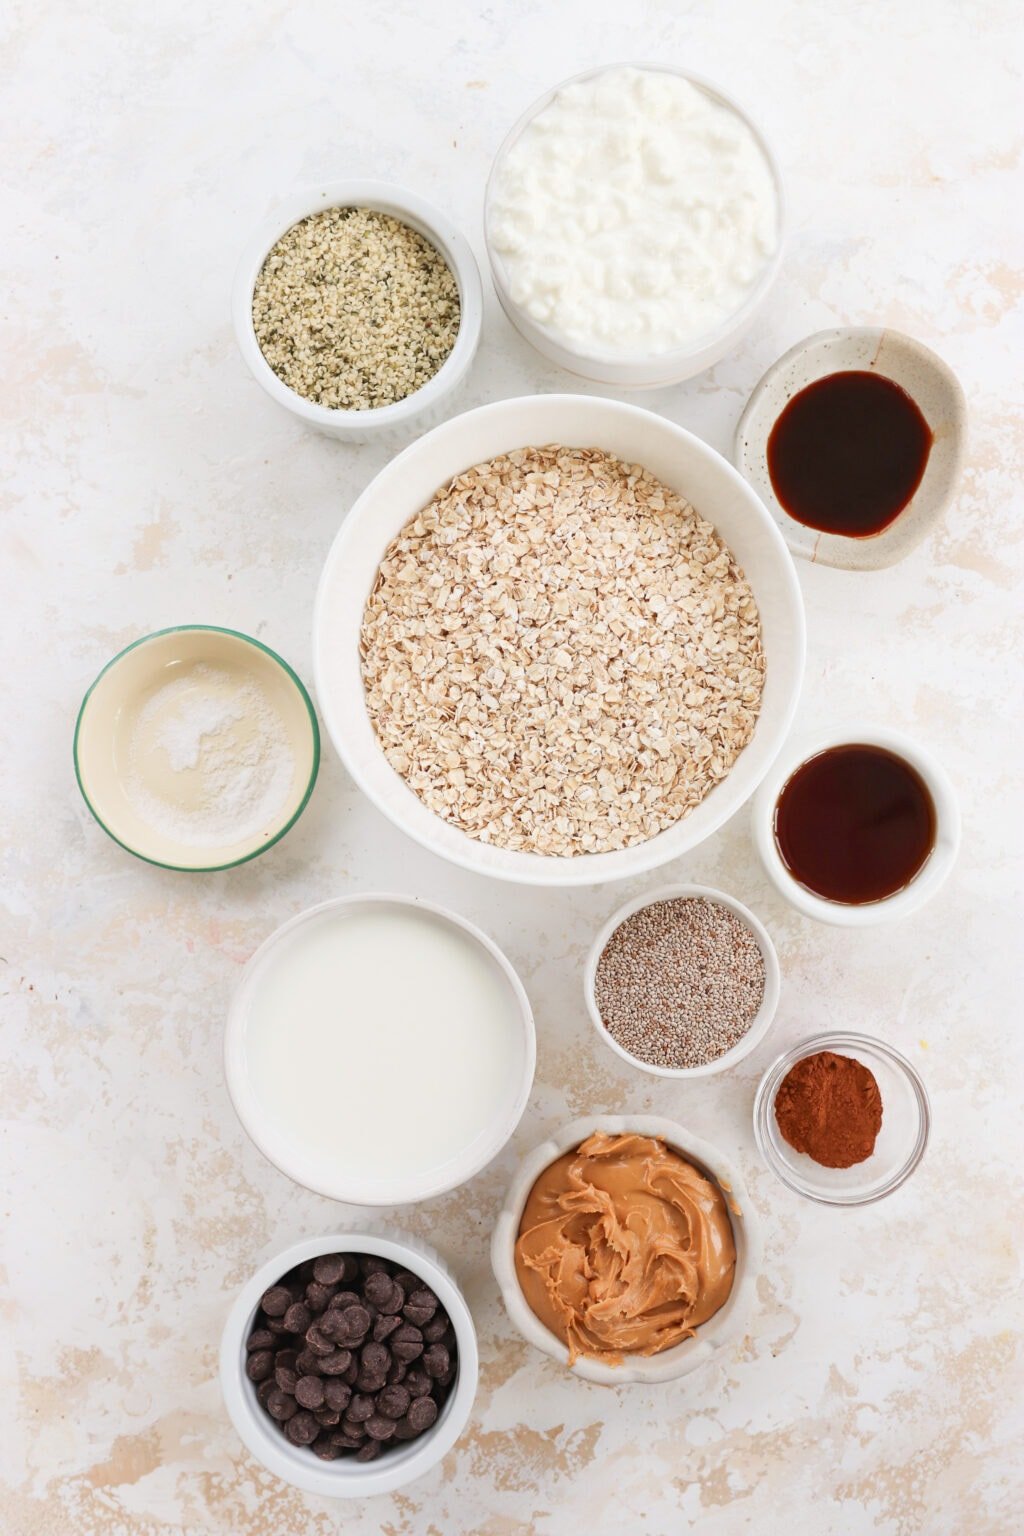 Ingredients for High Protein Cottage Cheese Blended Overnight Oats in white and glass bowls. Ingredients include quick oats, hemp hearts, chia seeds, vanilla extract, cinnamon, cottage cheese, peanut butter, milk and maple syrup.